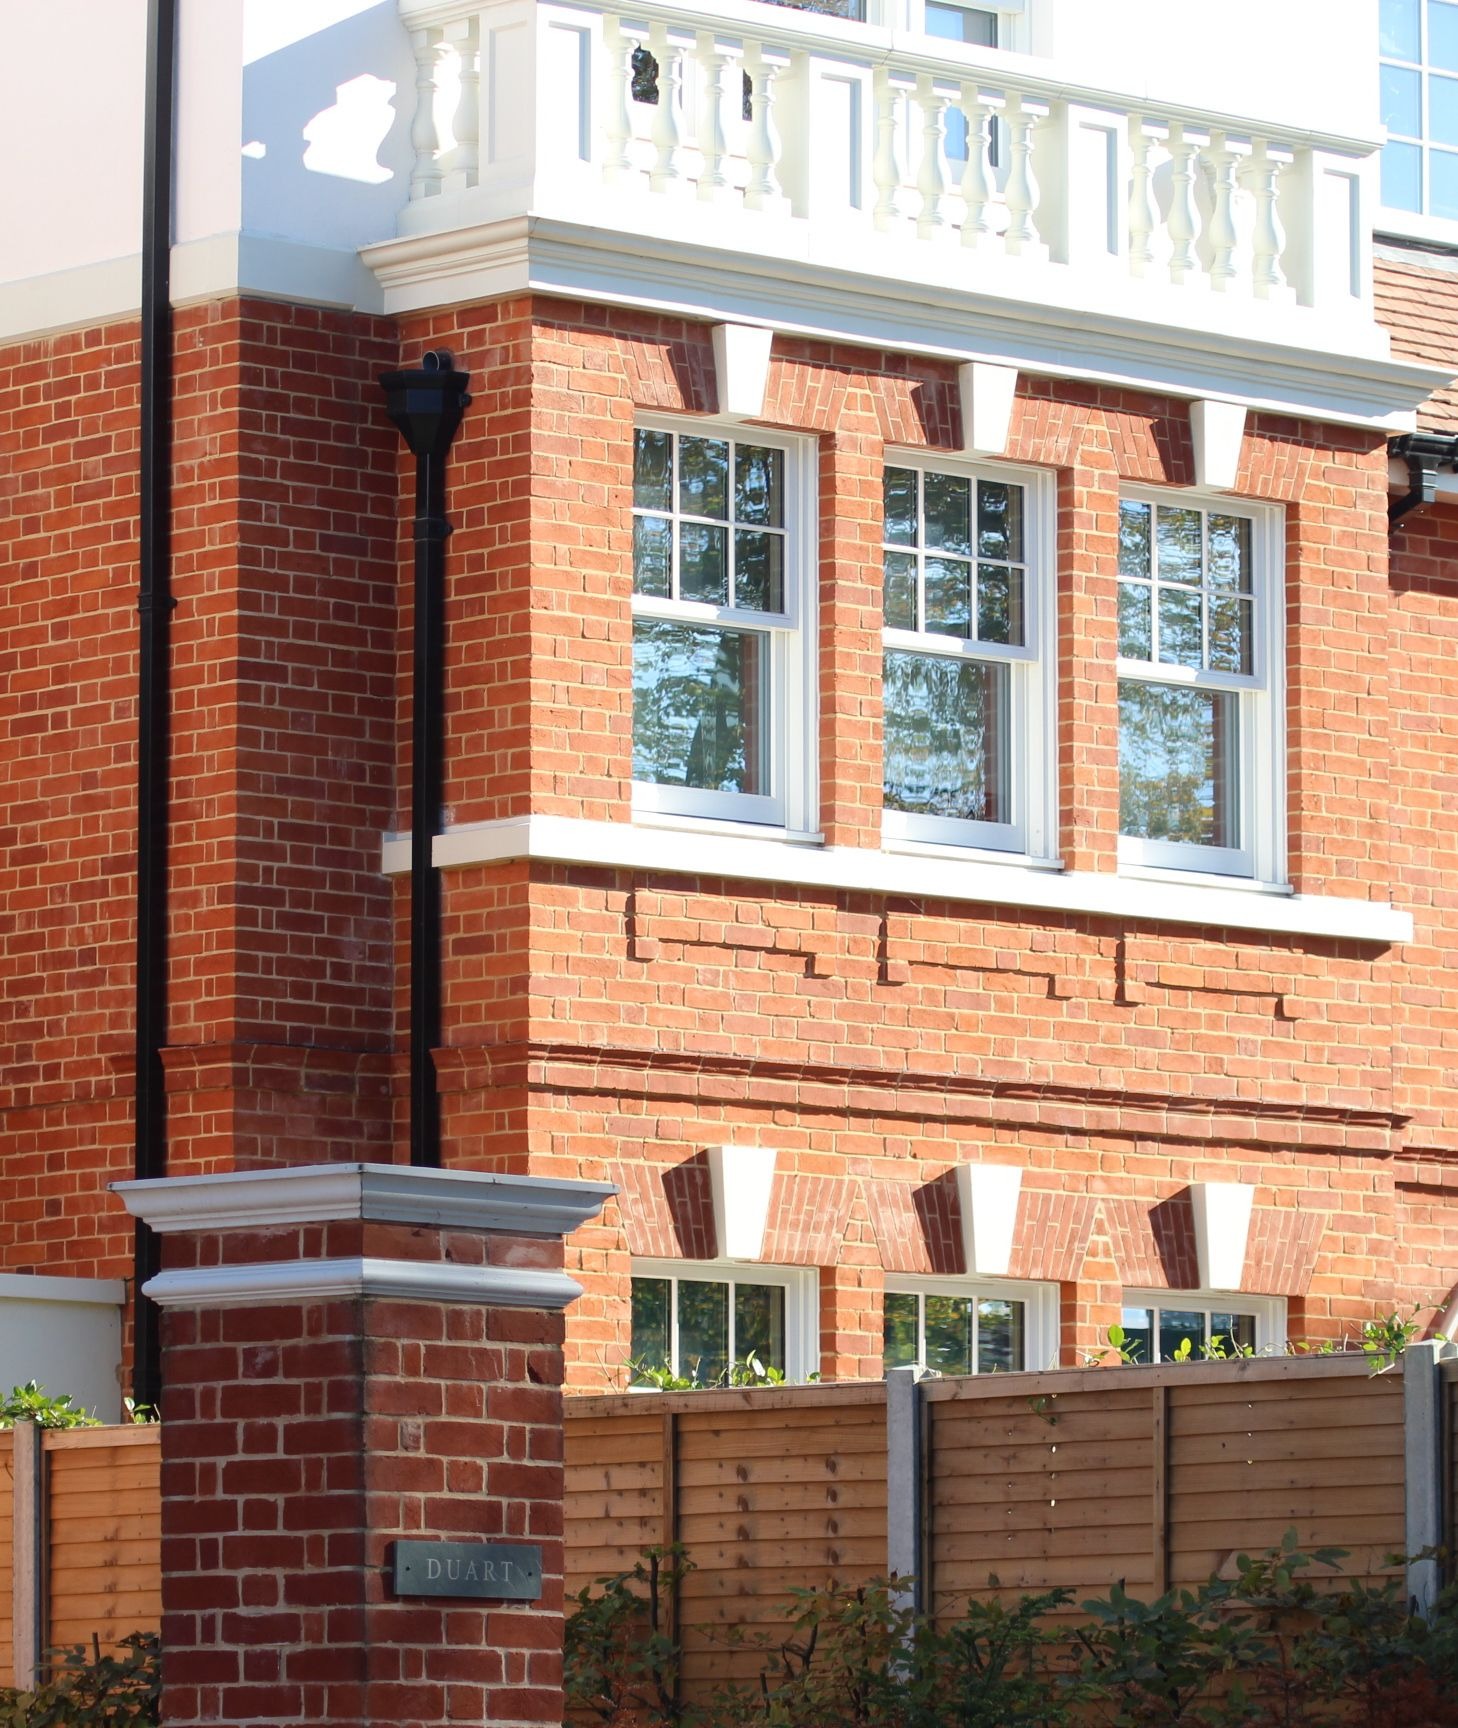 An image of a red brick property